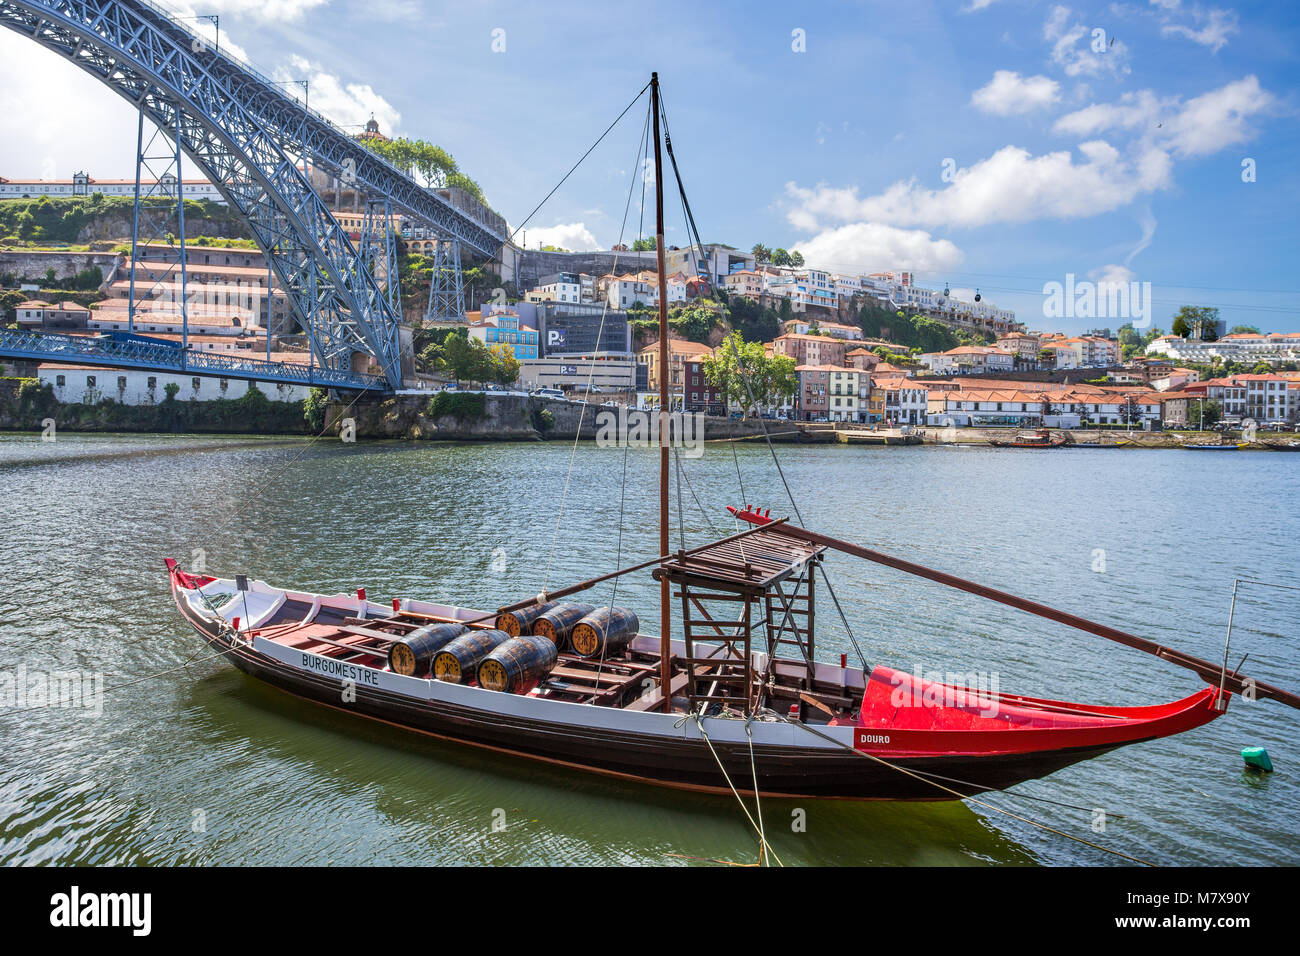 PORTO, PORTUGAL, JUNE 17, 2016 - Old town cityscape on the Douro River with traditional Rabelo boats. Stock Photo